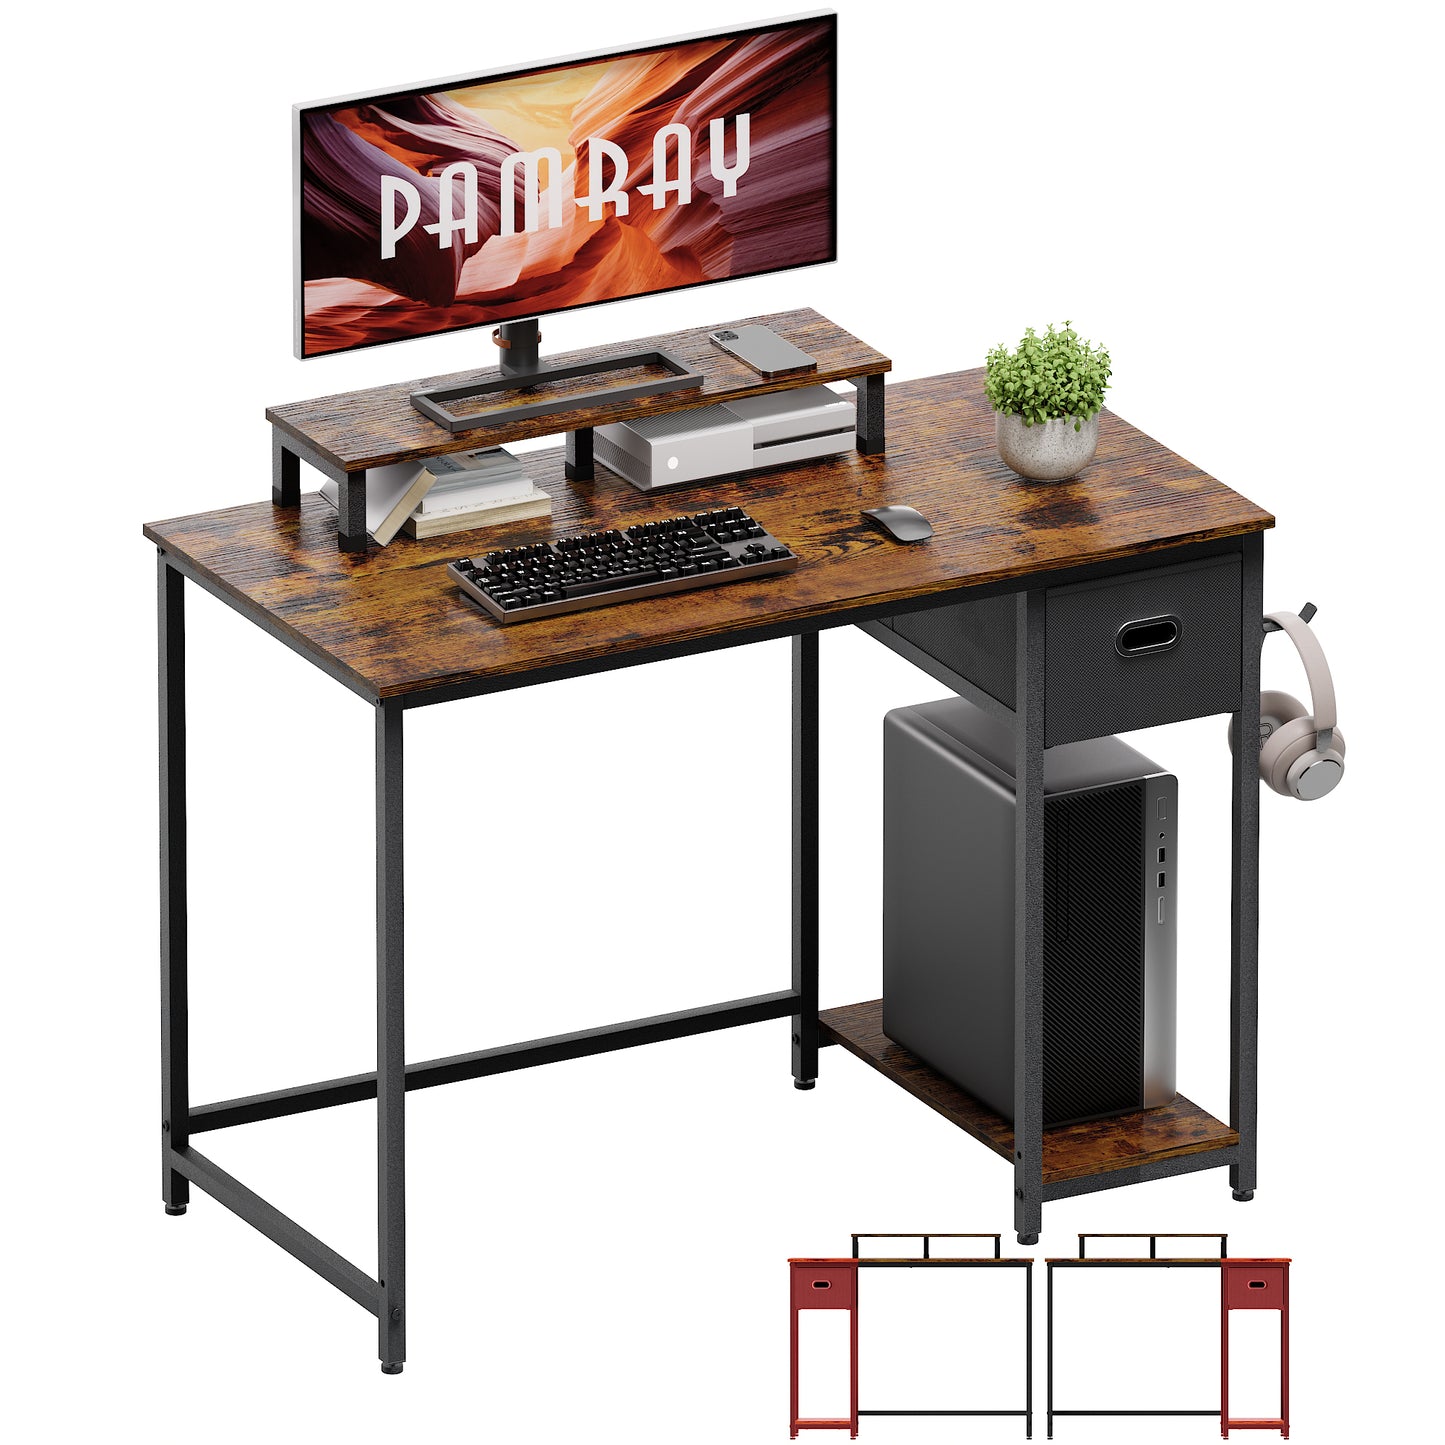 PAMRAY 39 Inch Computer Desk with Monitor Stand Small Home Office Desks with Storage Drawer for Bedroom